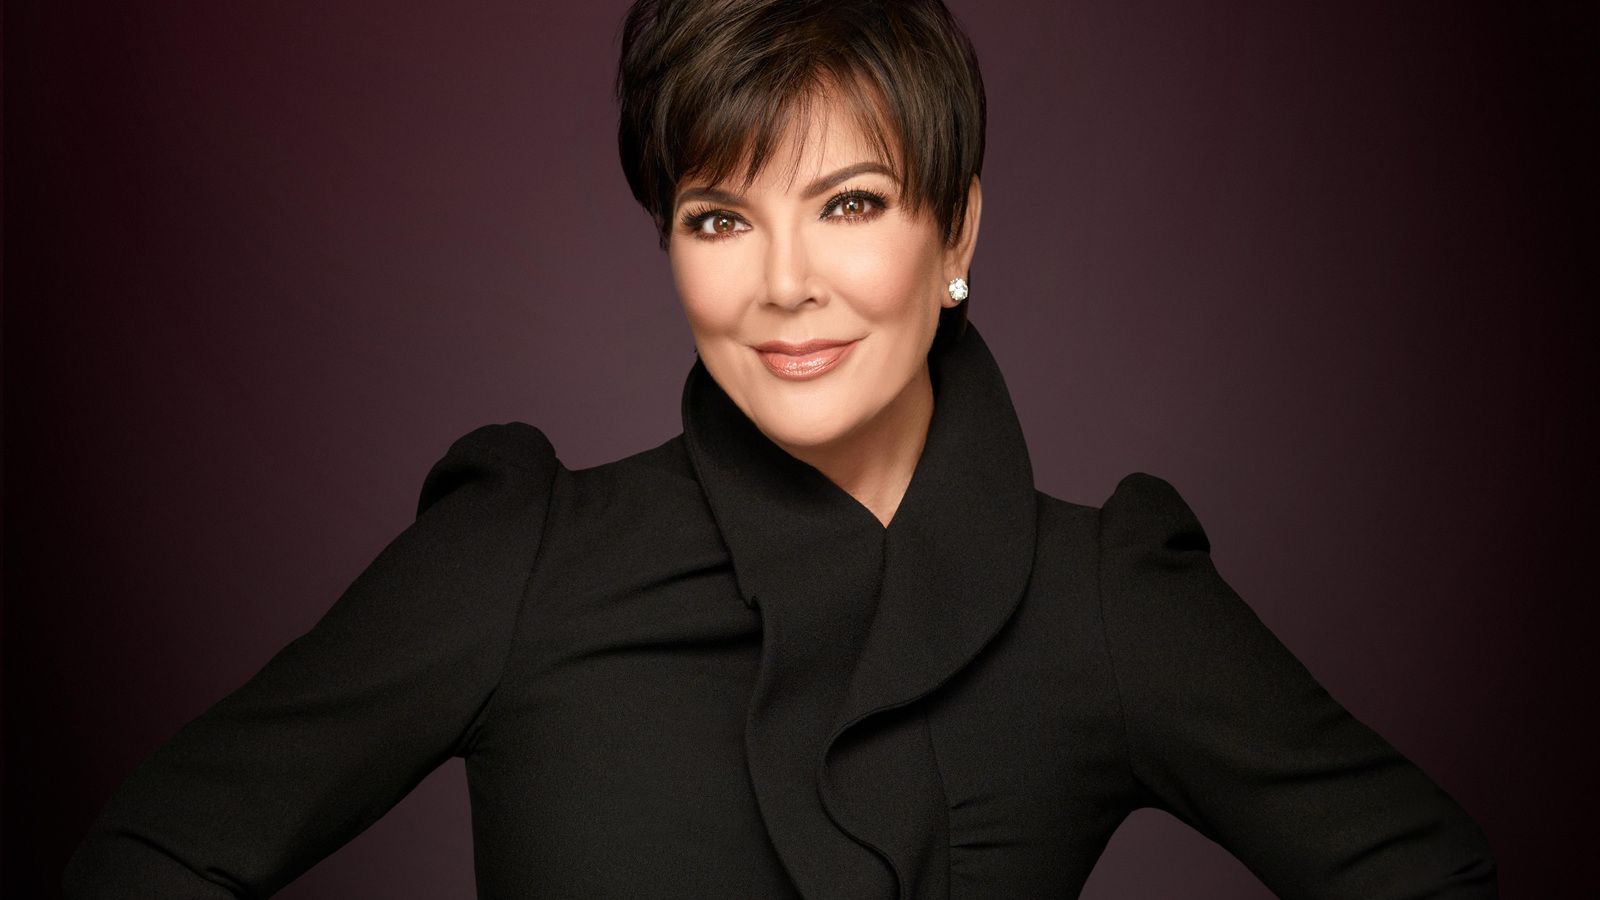 Kris Jenner Keeping Up With The Kardashians Season 14 2017 1600x900 Resolution HD 4k Wallpaper, Image, Background, Photo and Picture